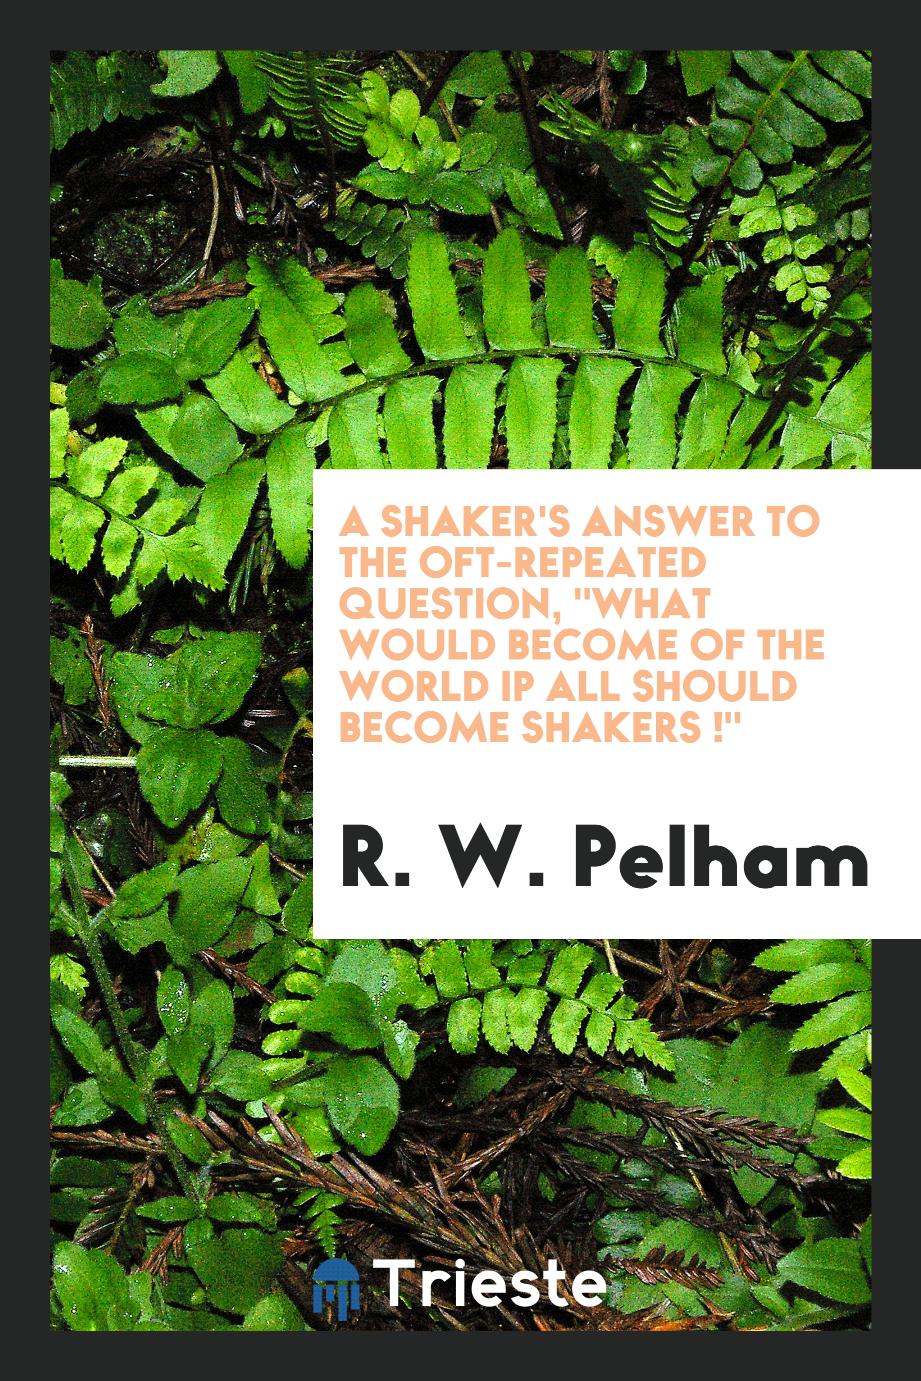 A Shaker's Answer to the Oft-repeated Question, "What Would Become of the world if all should become shakers !"